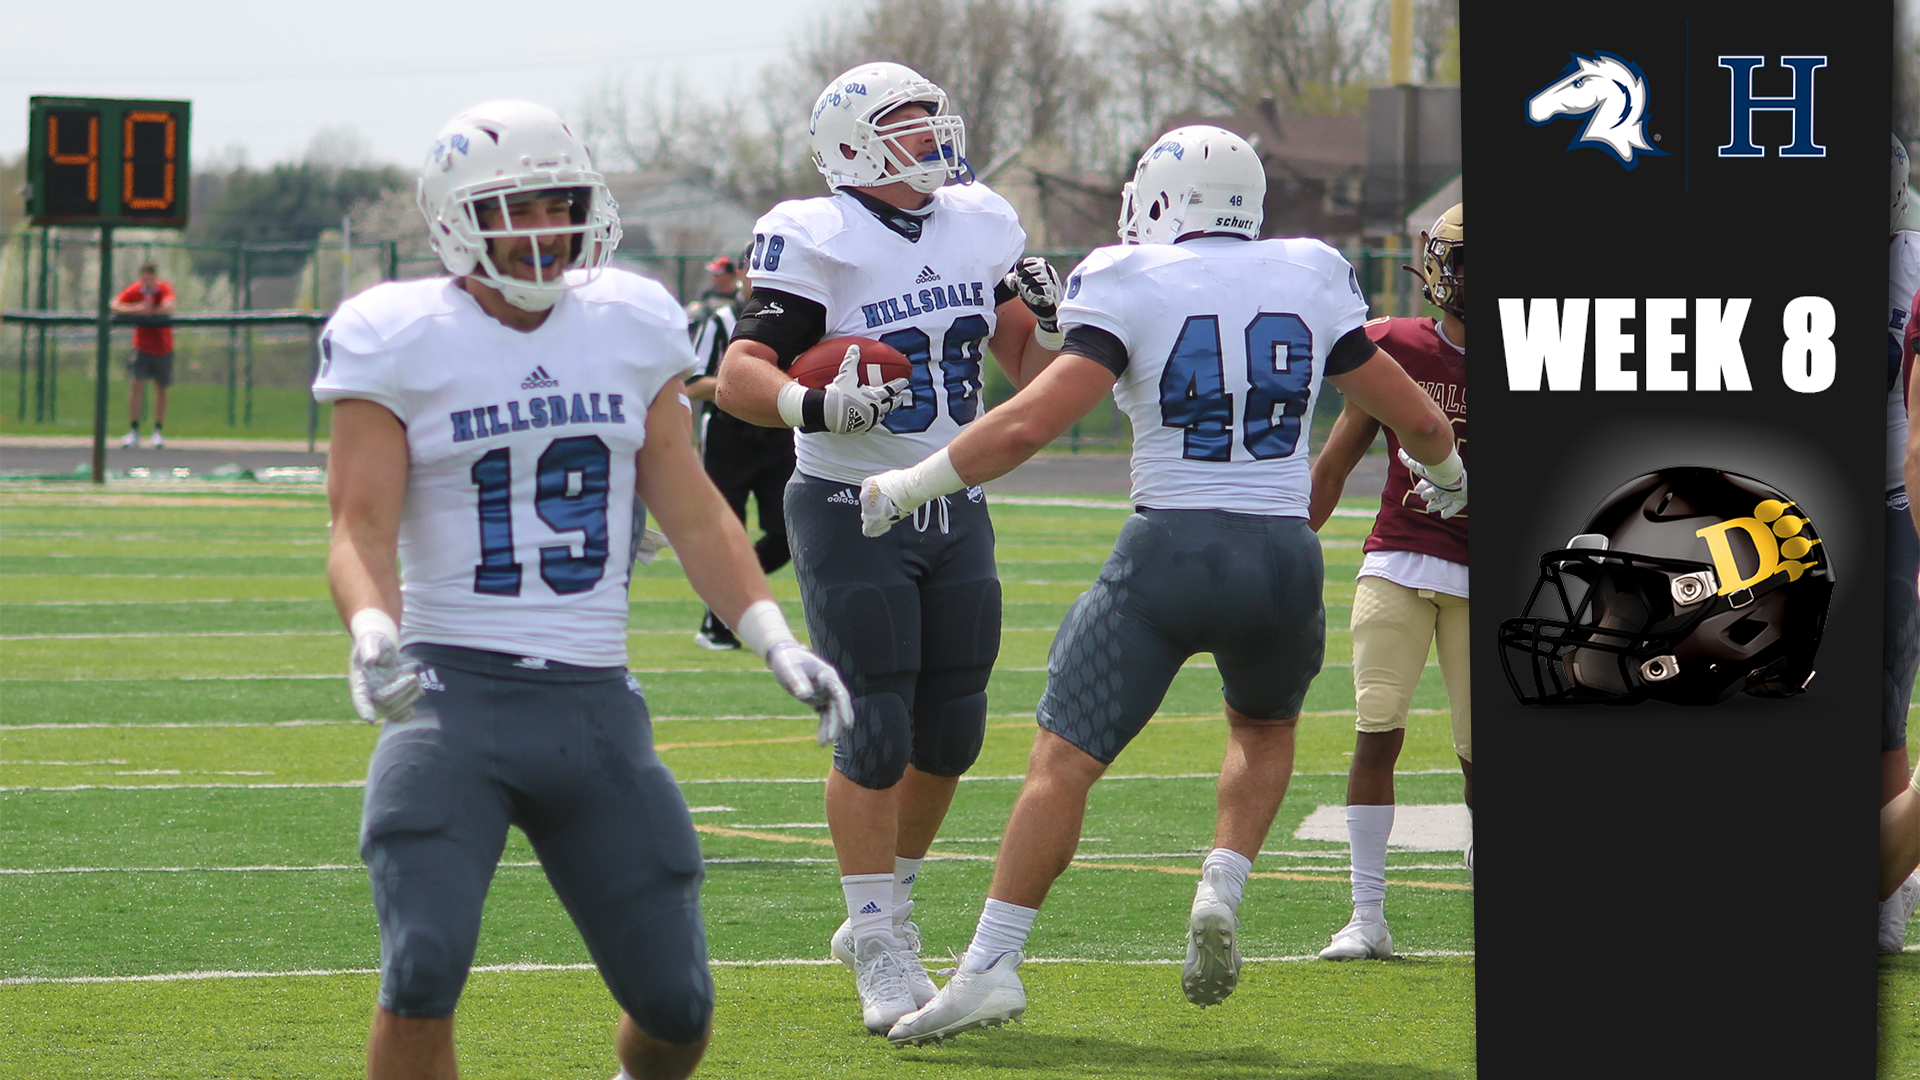 Preview: Charger football team wraps up Spring season at Ohio Dominican on Saturday